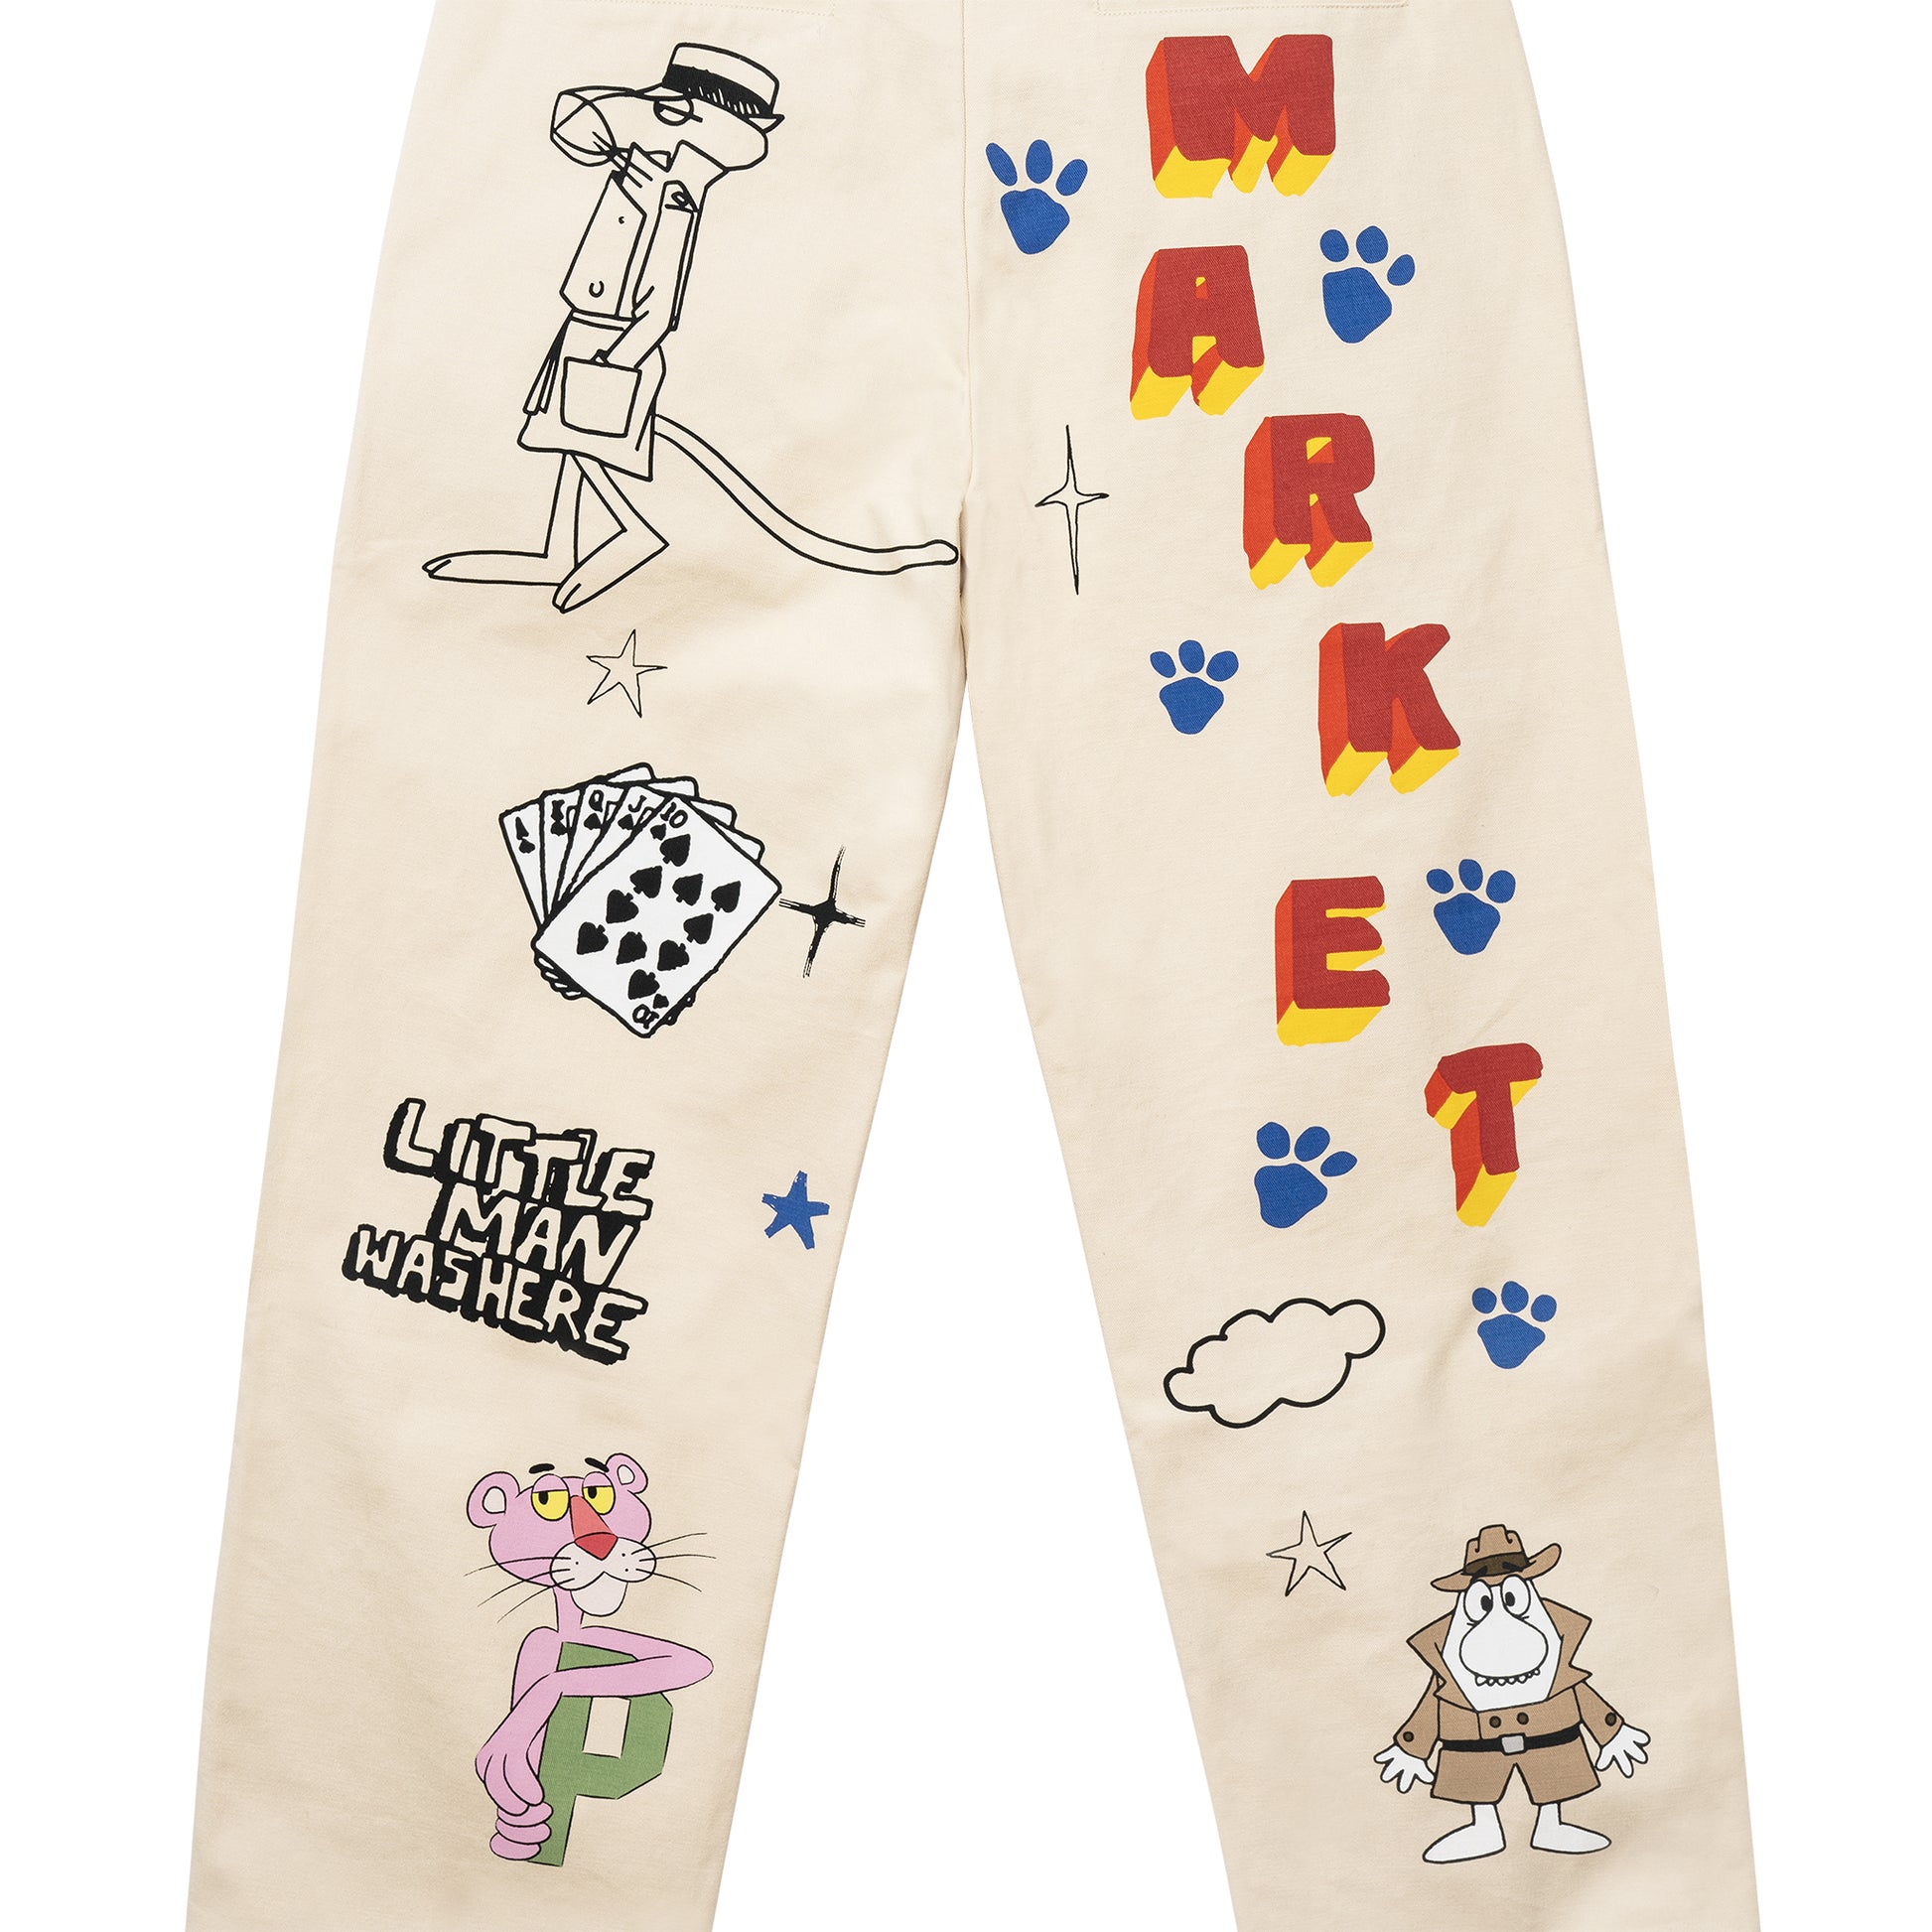 MARKET clothing brand PINK PANTHER SENIOR PANTS. Find more graphic tees, sweatpants, shorts and more bottoms at MarketStudios.com. Formally Chinatown Market.